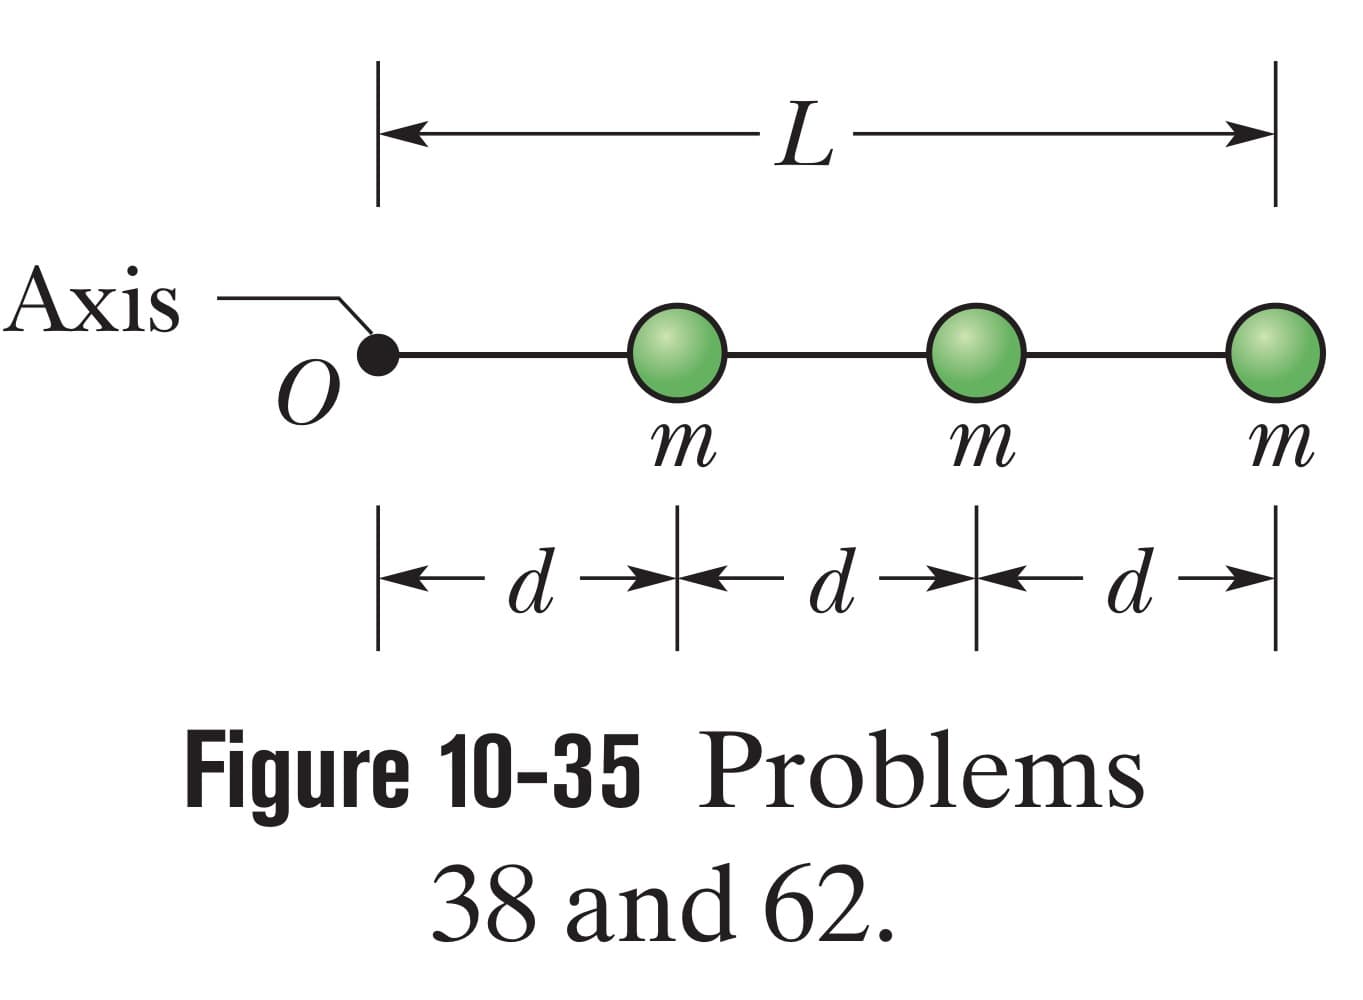 -L-
Axis
т
т
т
-d→-d→--d→
Figure 10-35 Problems
38 and 62.
